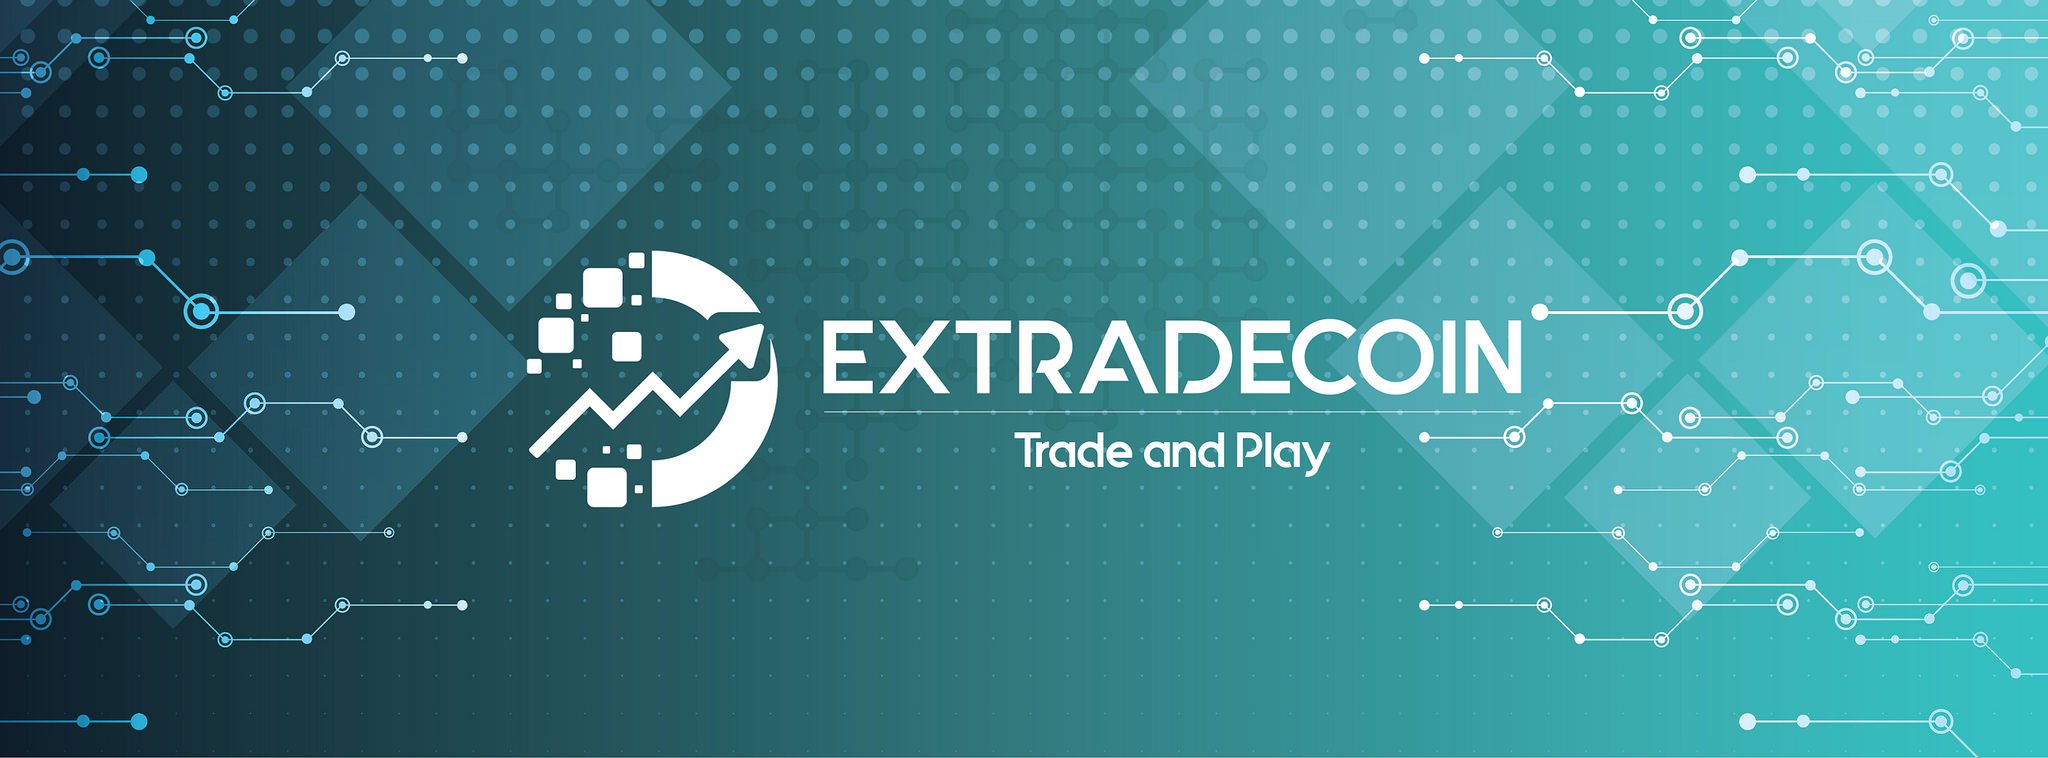 EXTRADECOIN - The Trade Of Digital